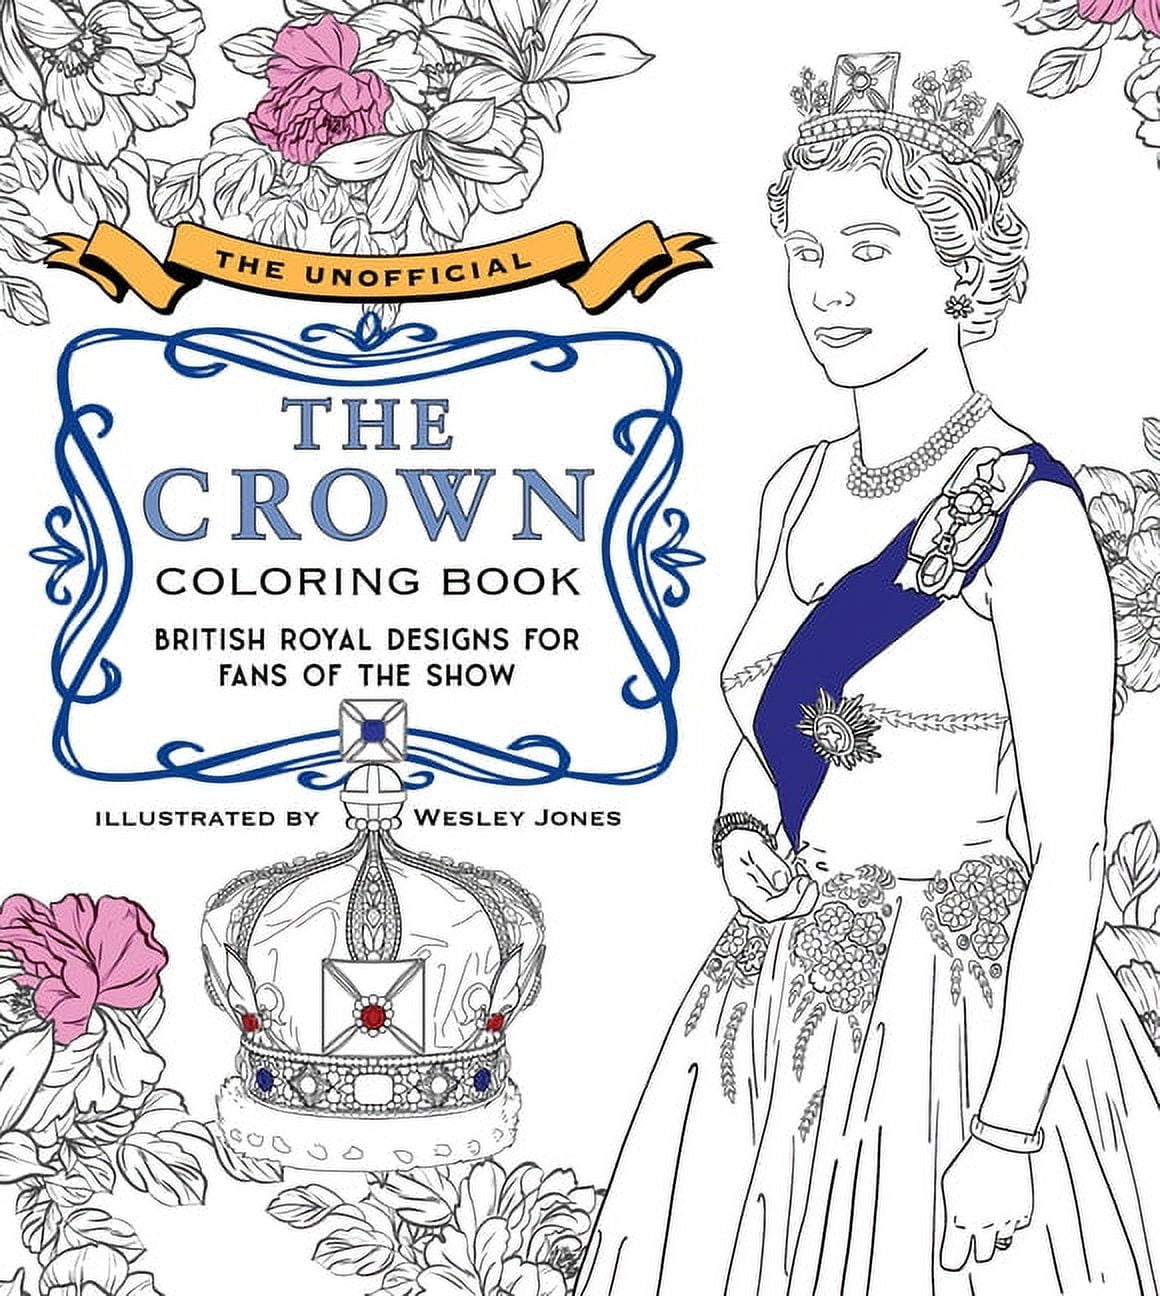 British Artist Draws Coloring Books For Adults And Sells Million